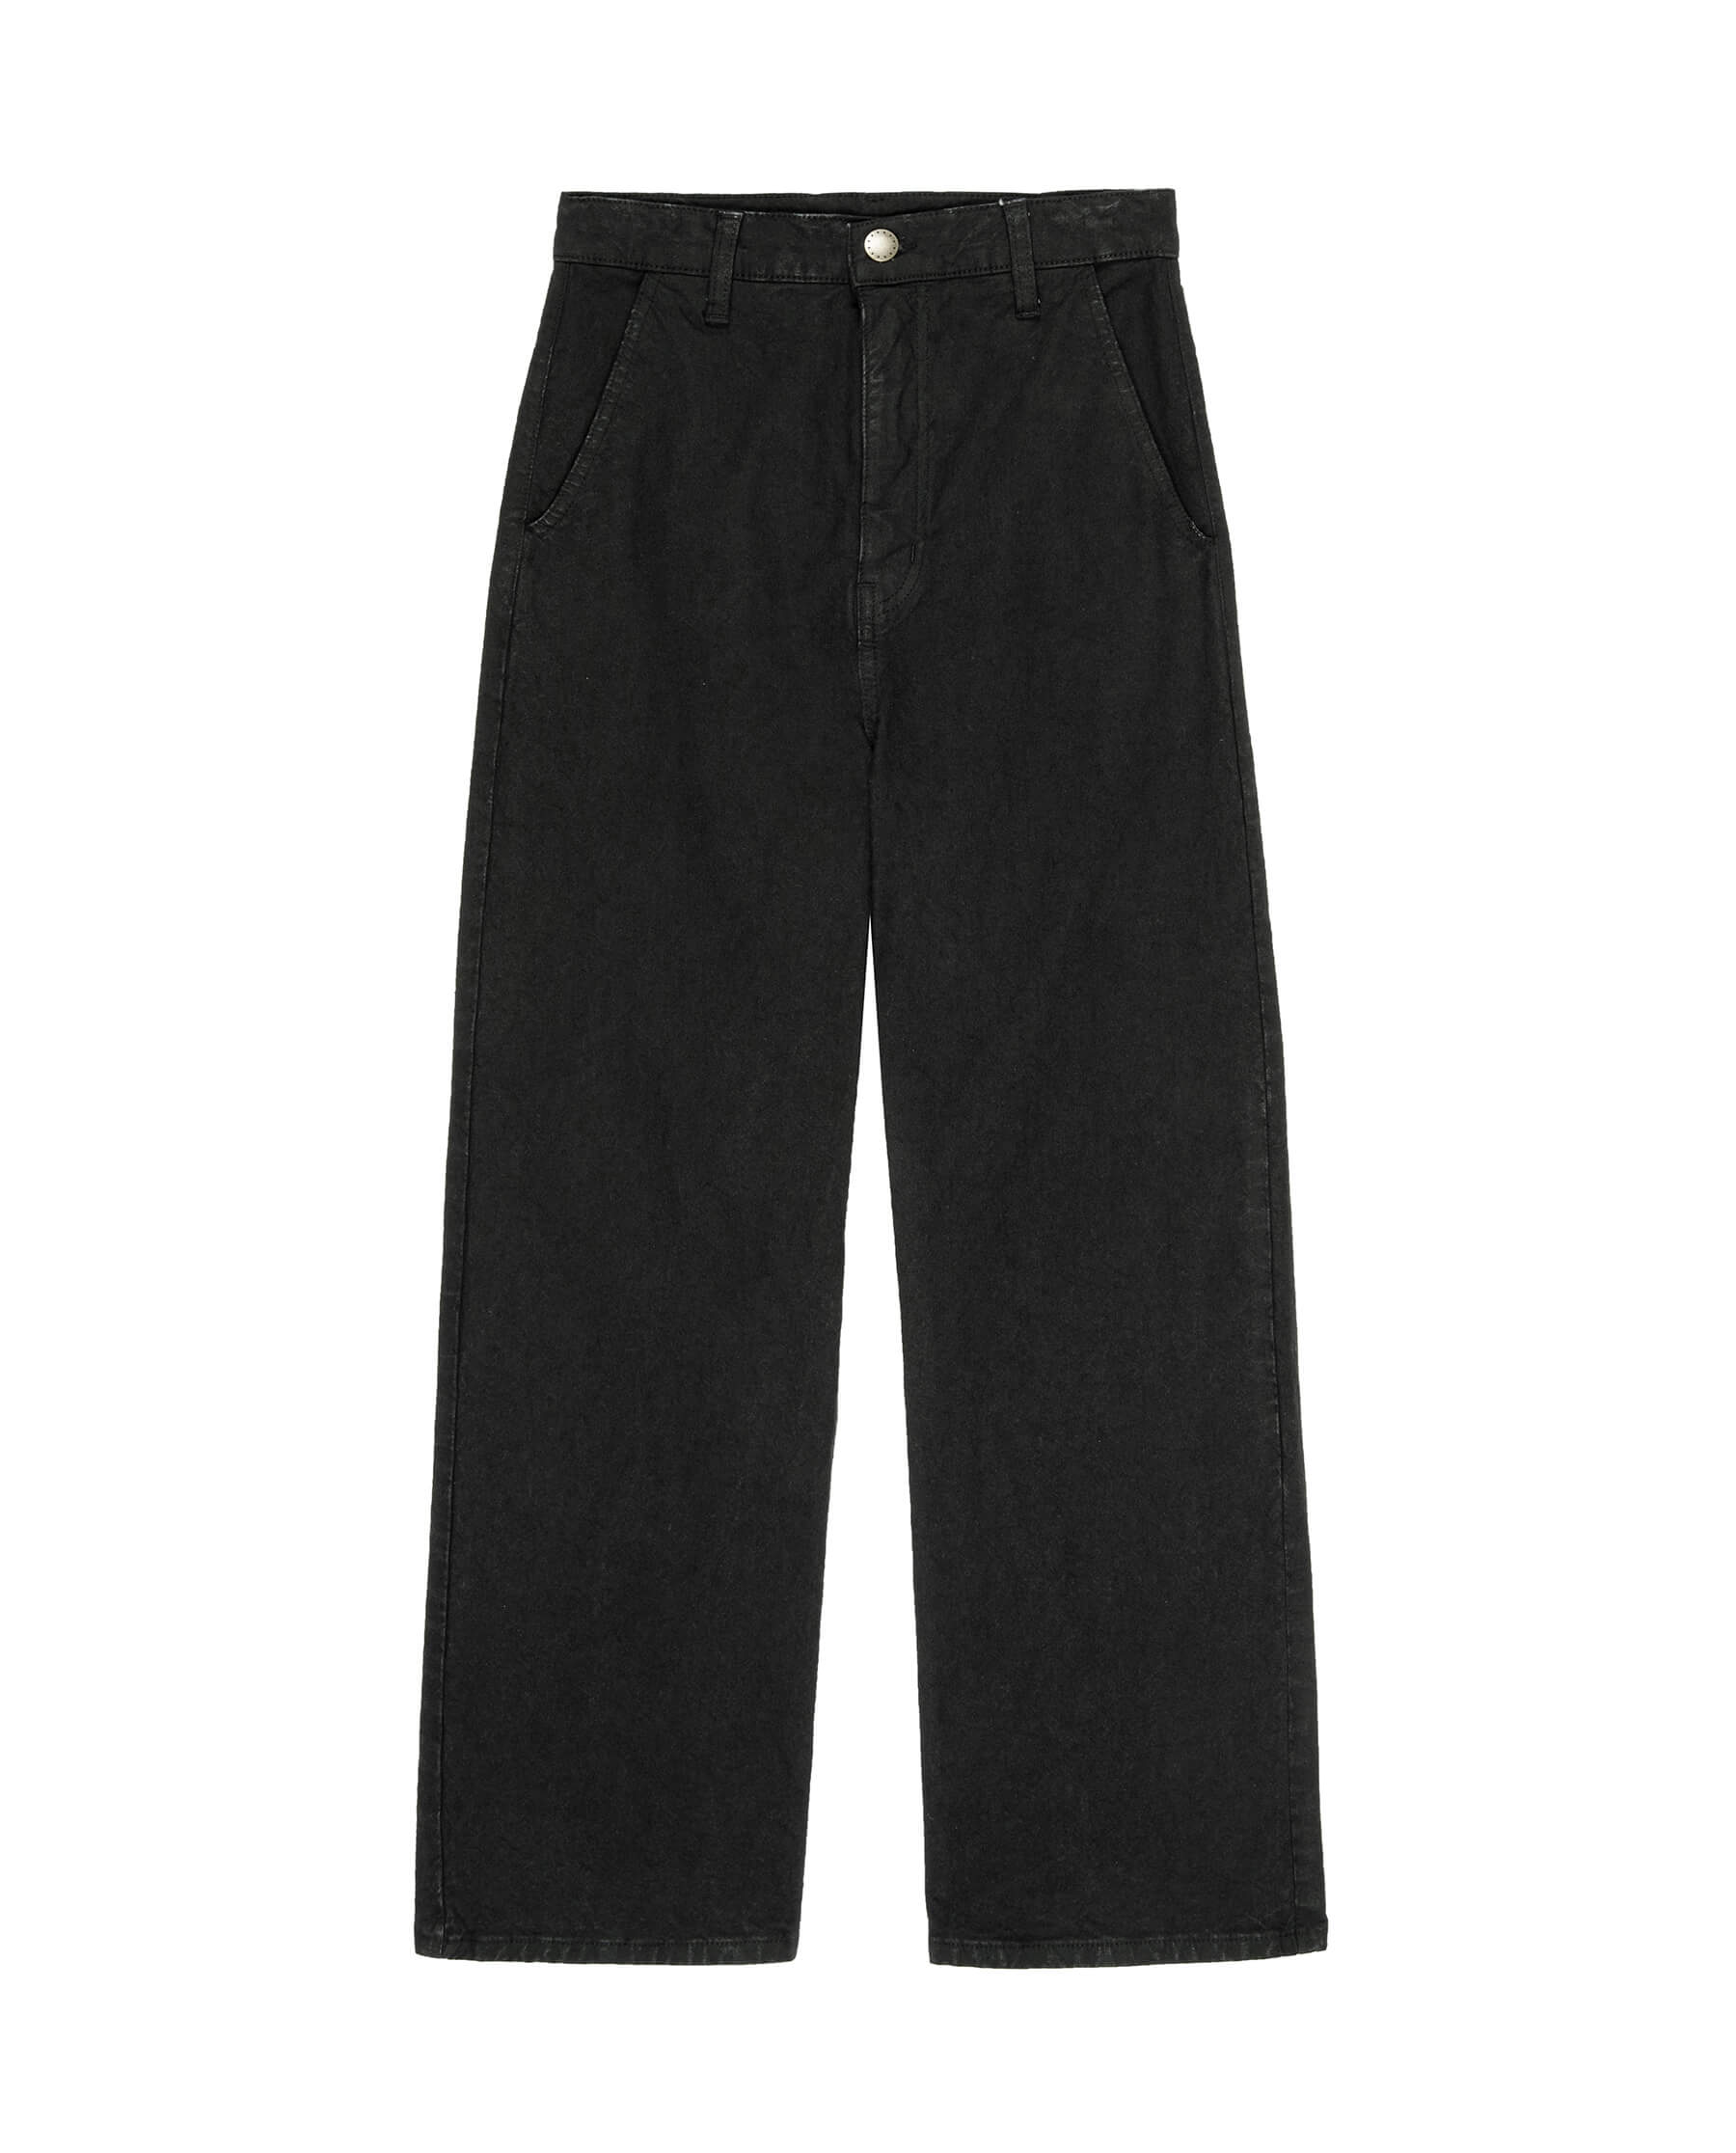 The Painter Pant - Almost Black